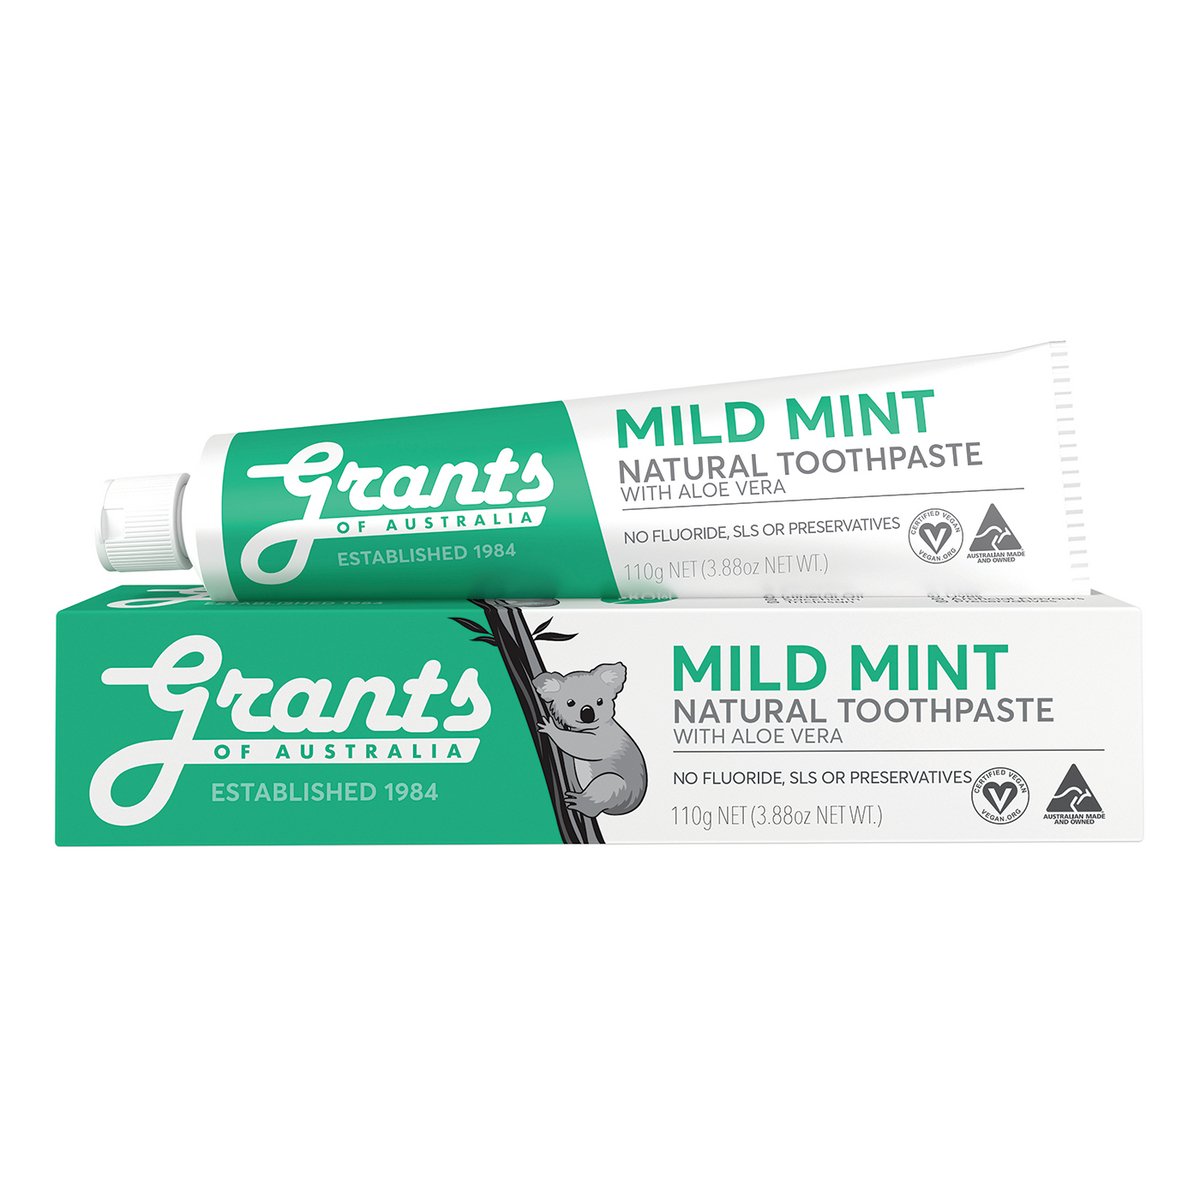 Grants Natural Toothpaste - Fluoride Free - 110g variety - #shop_name - Beauty & Care - -Grants